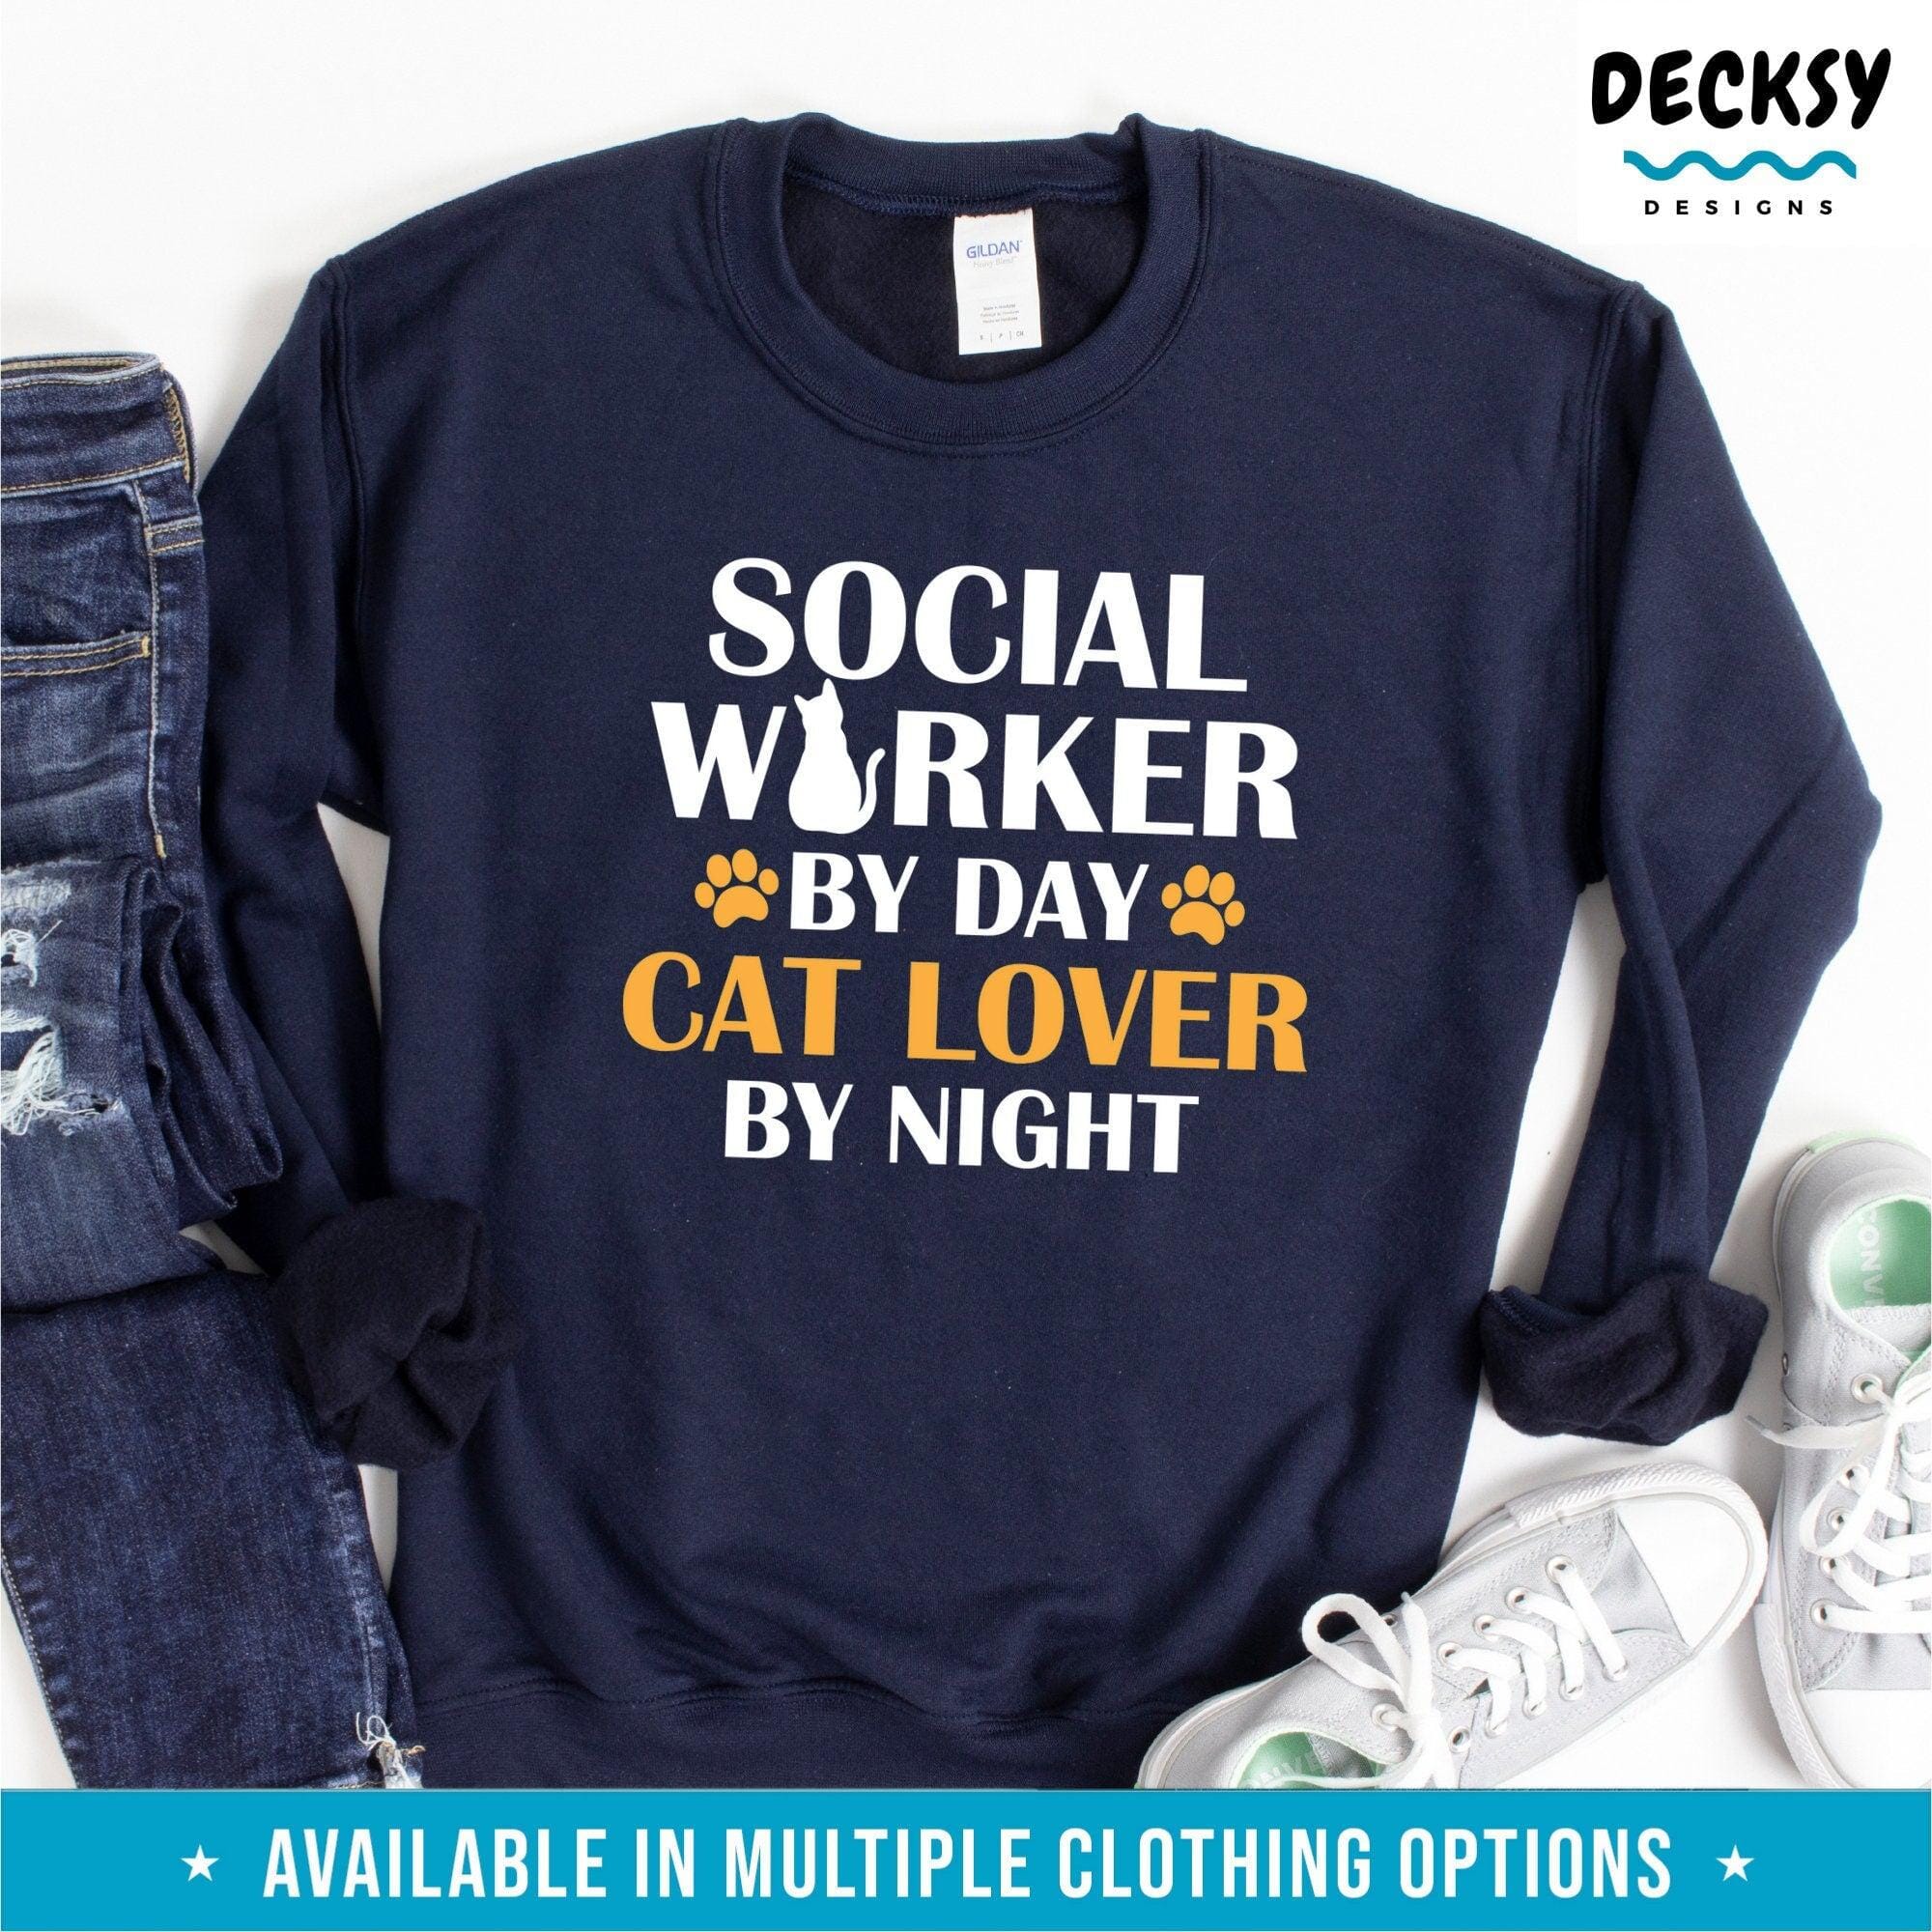 Cat Lover Shirt, Gift for Social Worker-Clothing:Gender-Neutral Adult Clothing:Tops & Tees:T-shirts:Graphic Tees-DecksyDesigns